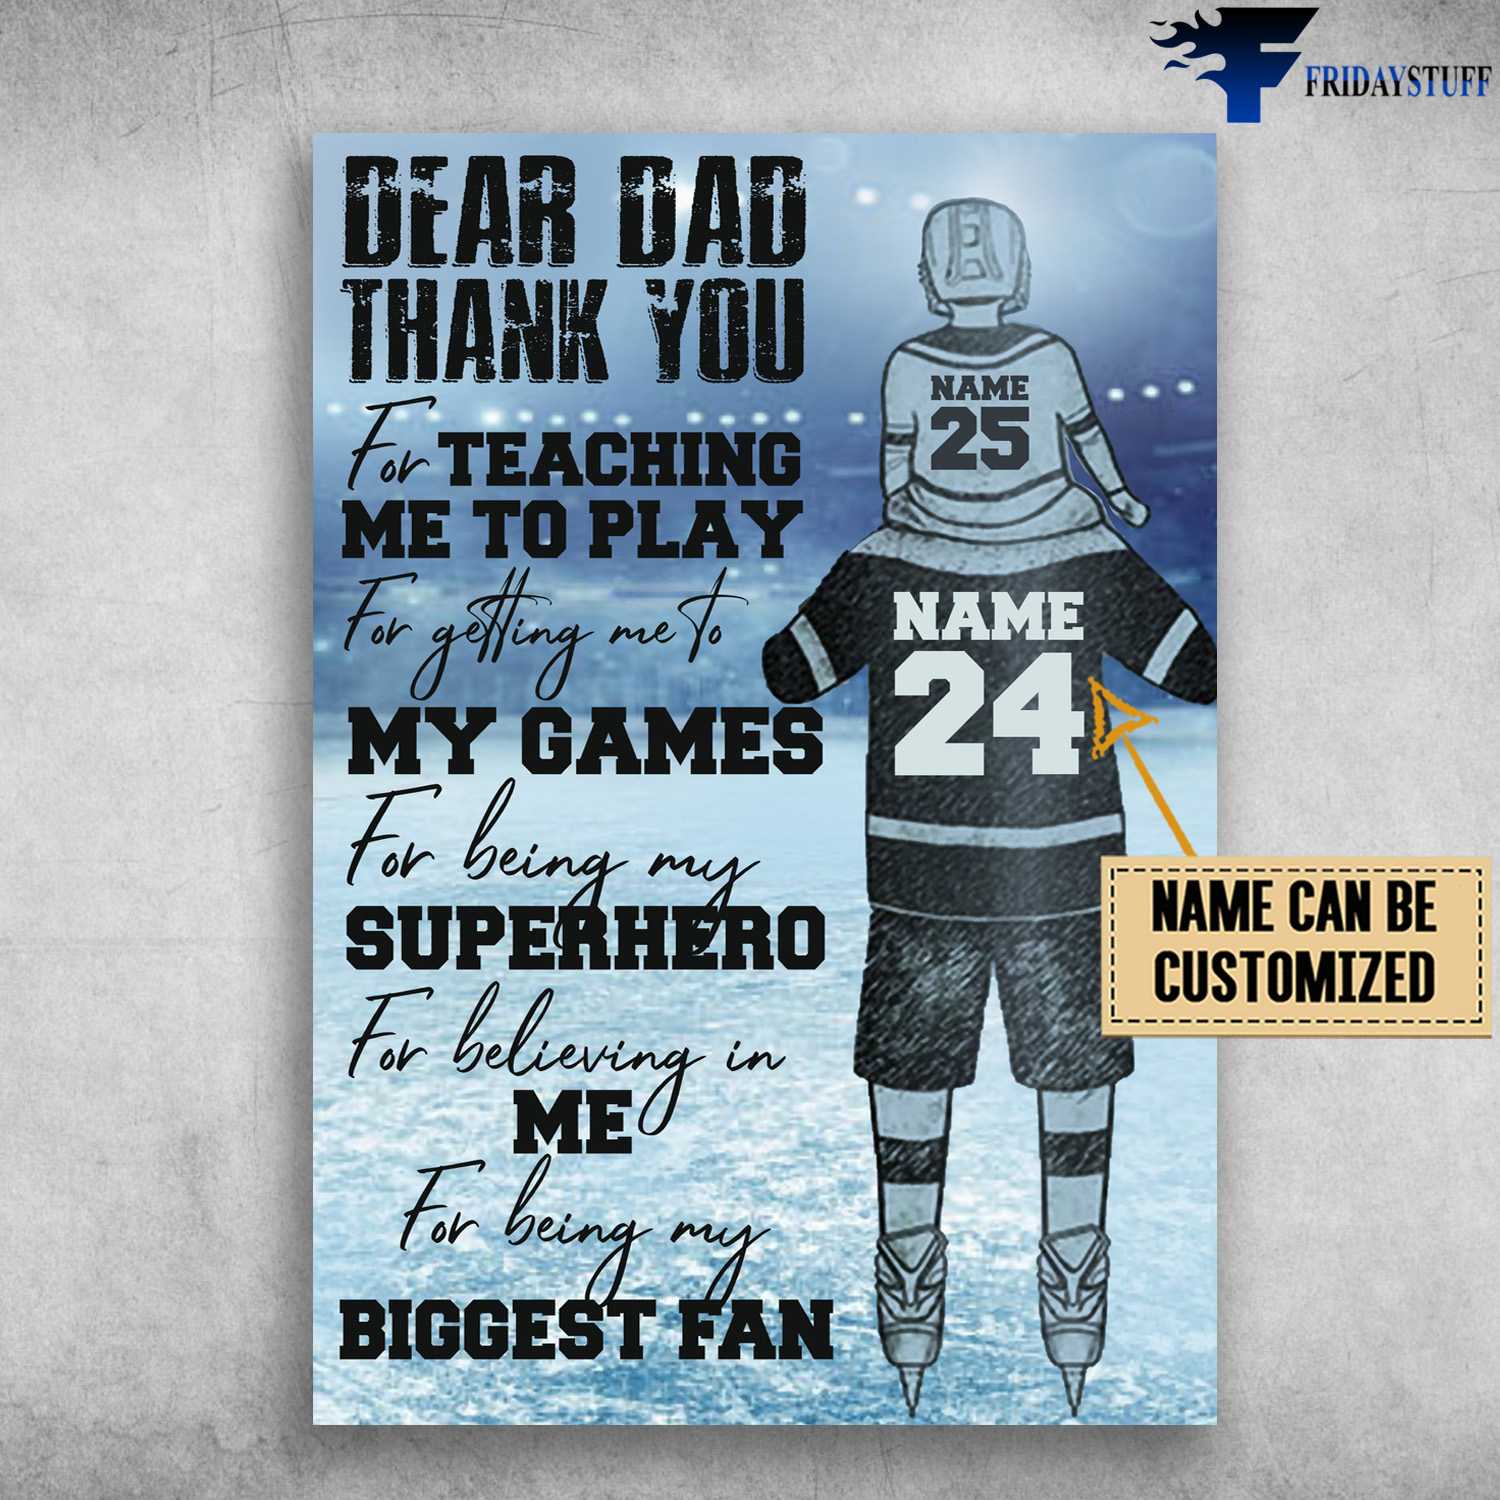 Hockey Lover, Hockey Dad, Dear Dad, Thank You For Teaching Me, To Play For Getting Me, To My Games, For Being My Superhero